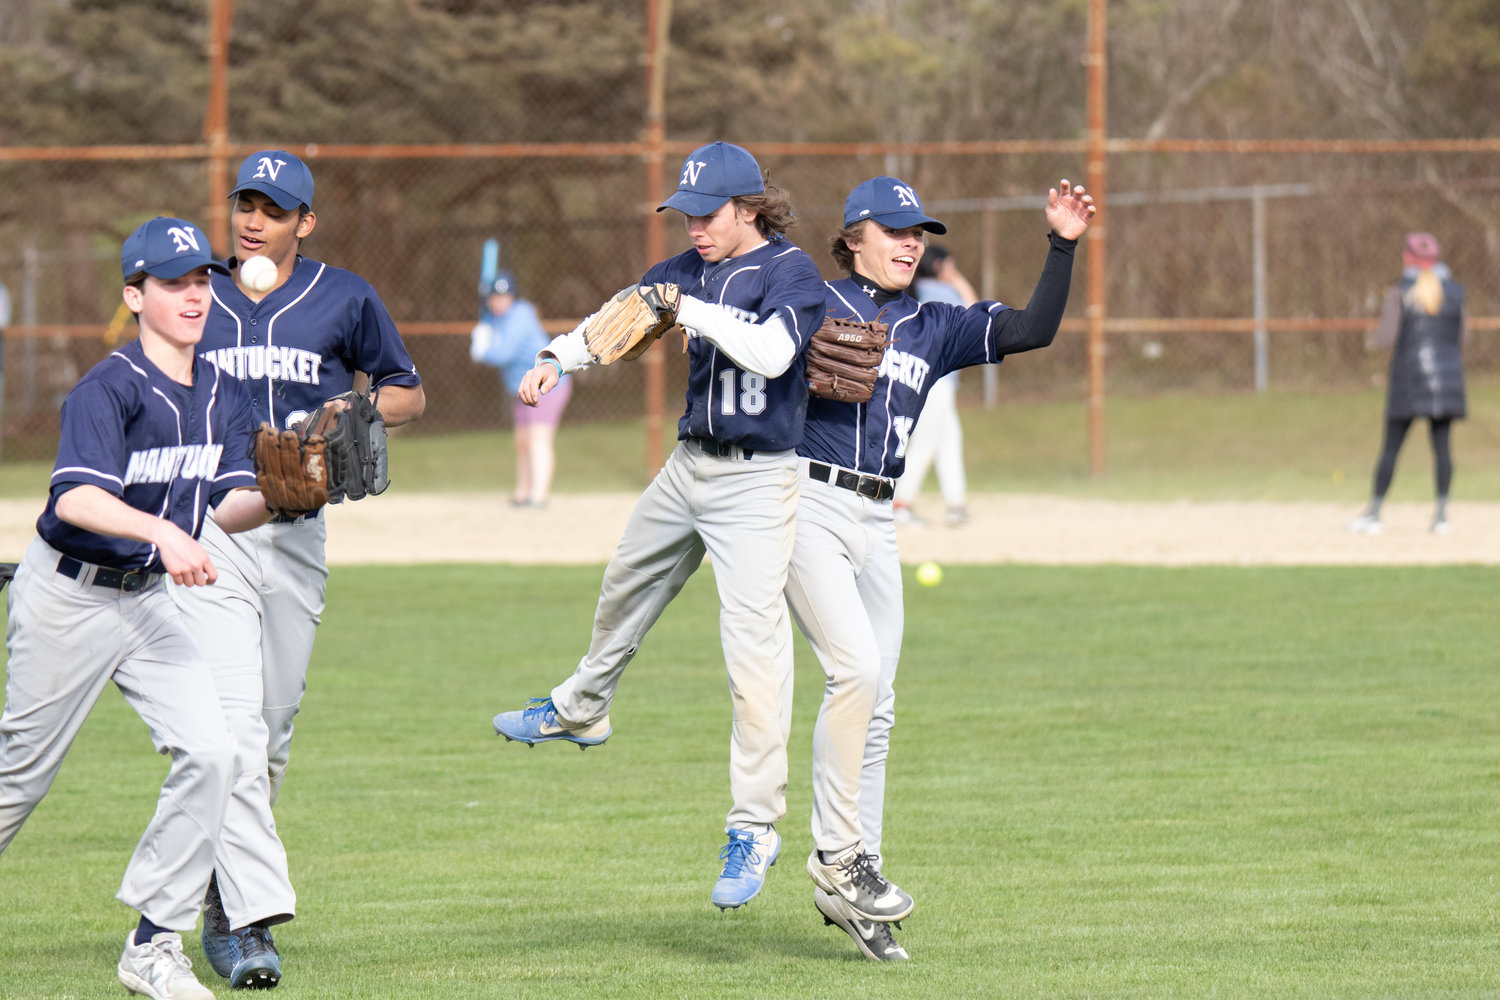 Garner Ray and James Mack celebrate the Whalers' first win of the season, 10-4 over Rising Ride